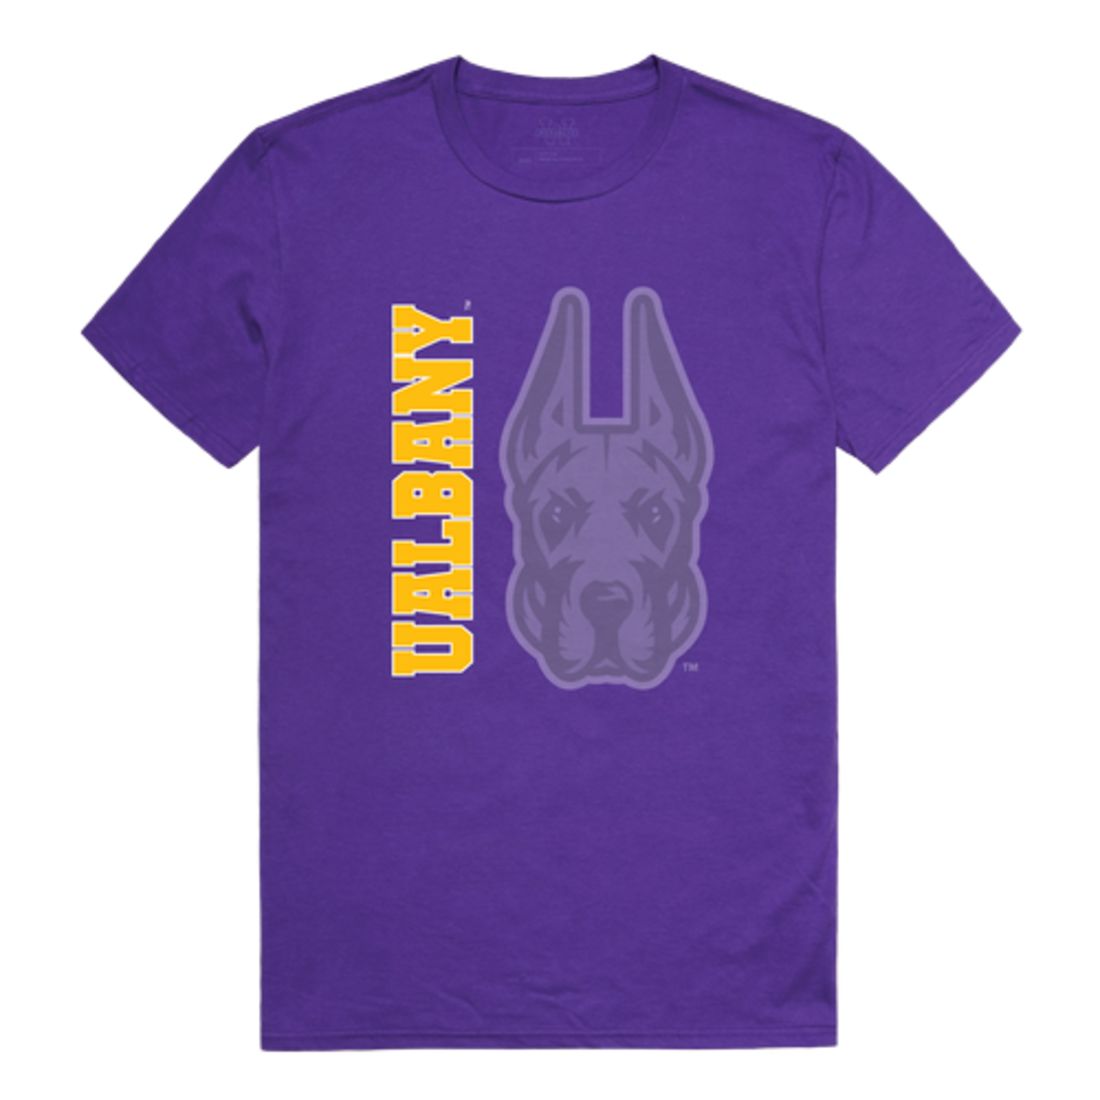 UAlbany University of Albany The Great Danes Ghost College T-Shirt